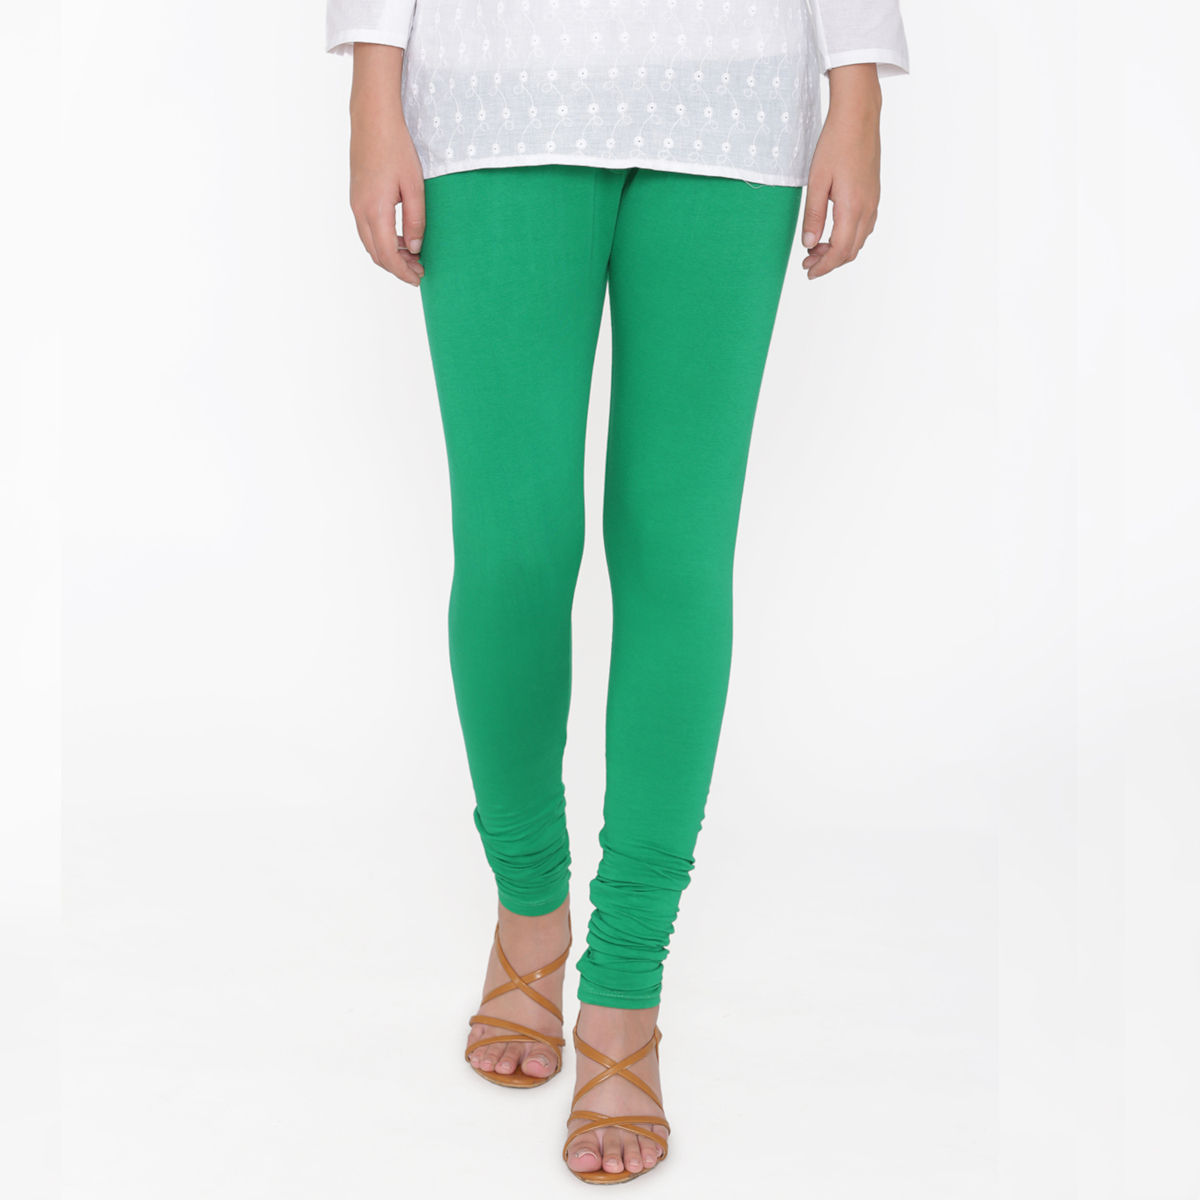 Which colour long top can go with pink leggings? - Quora